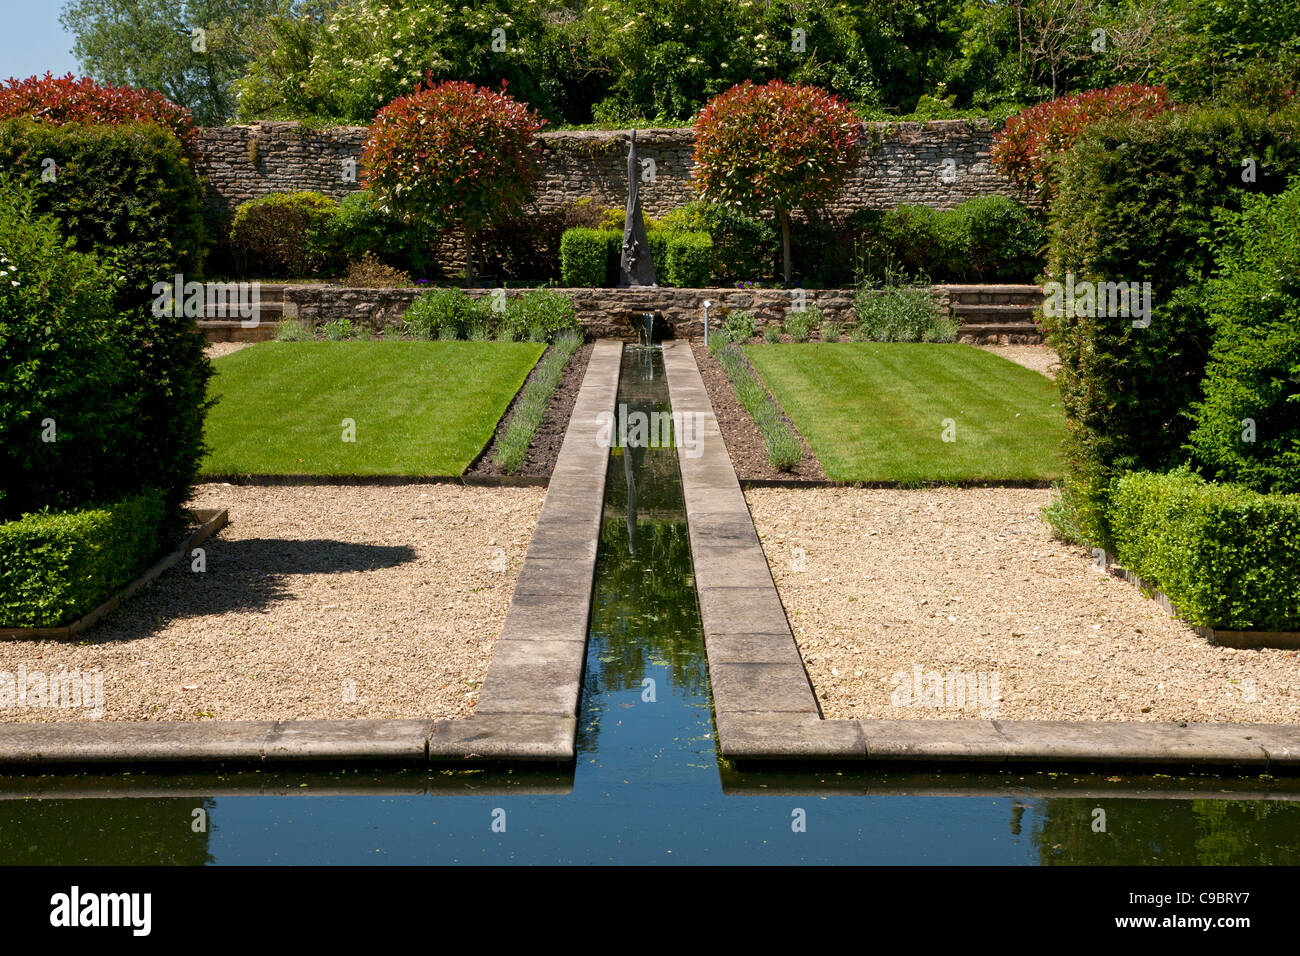 Rill water feature edged with lavender in walled private garden laid out in a formal style with obelisk as focal point, England. Stock Photo